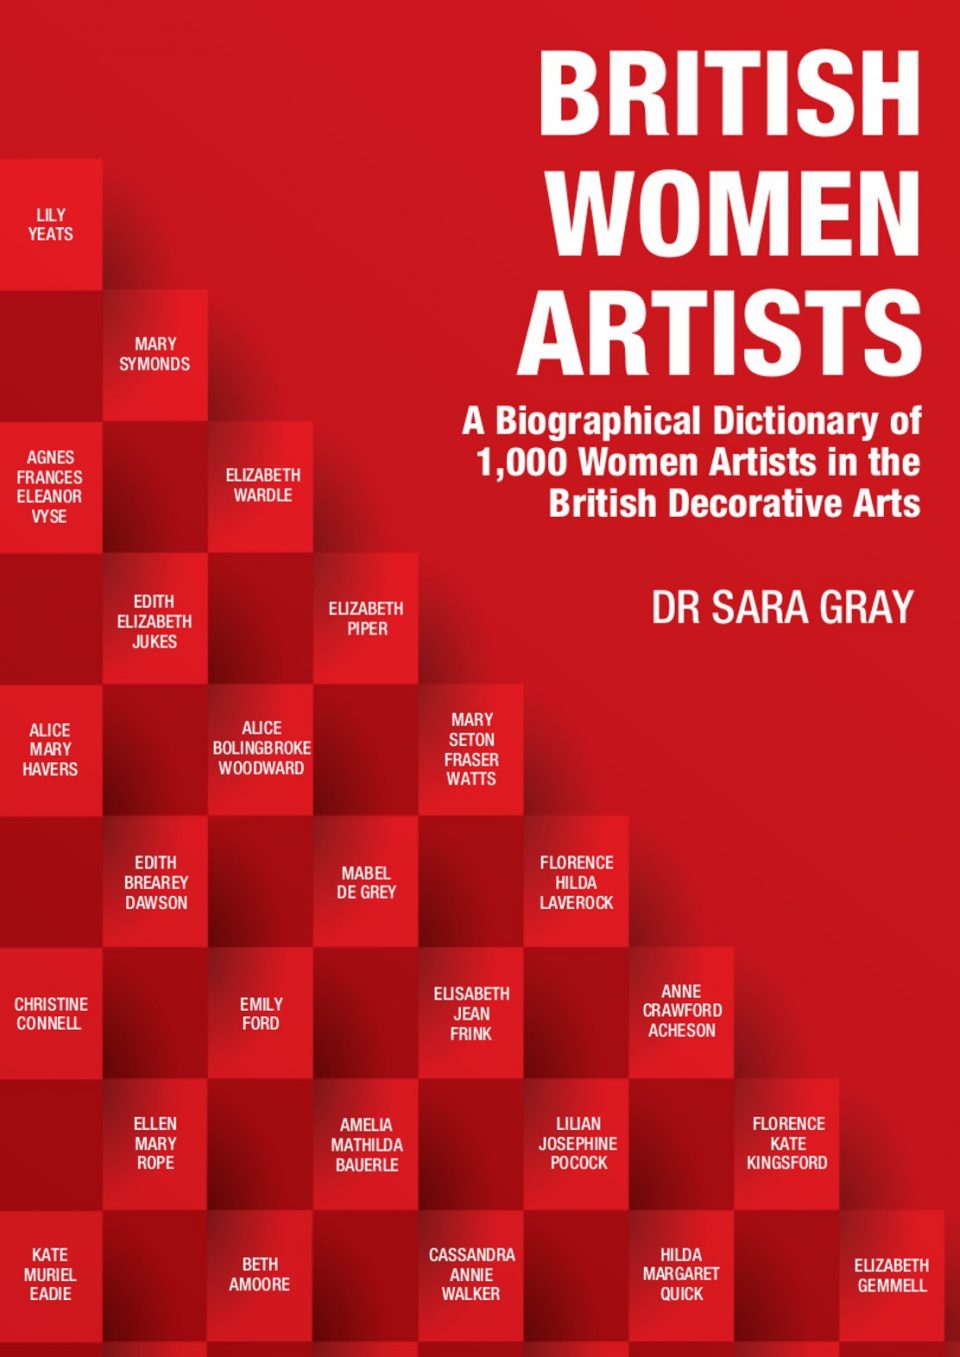 British Women Artists A Biographical Dictionary by Dr Sara Gray